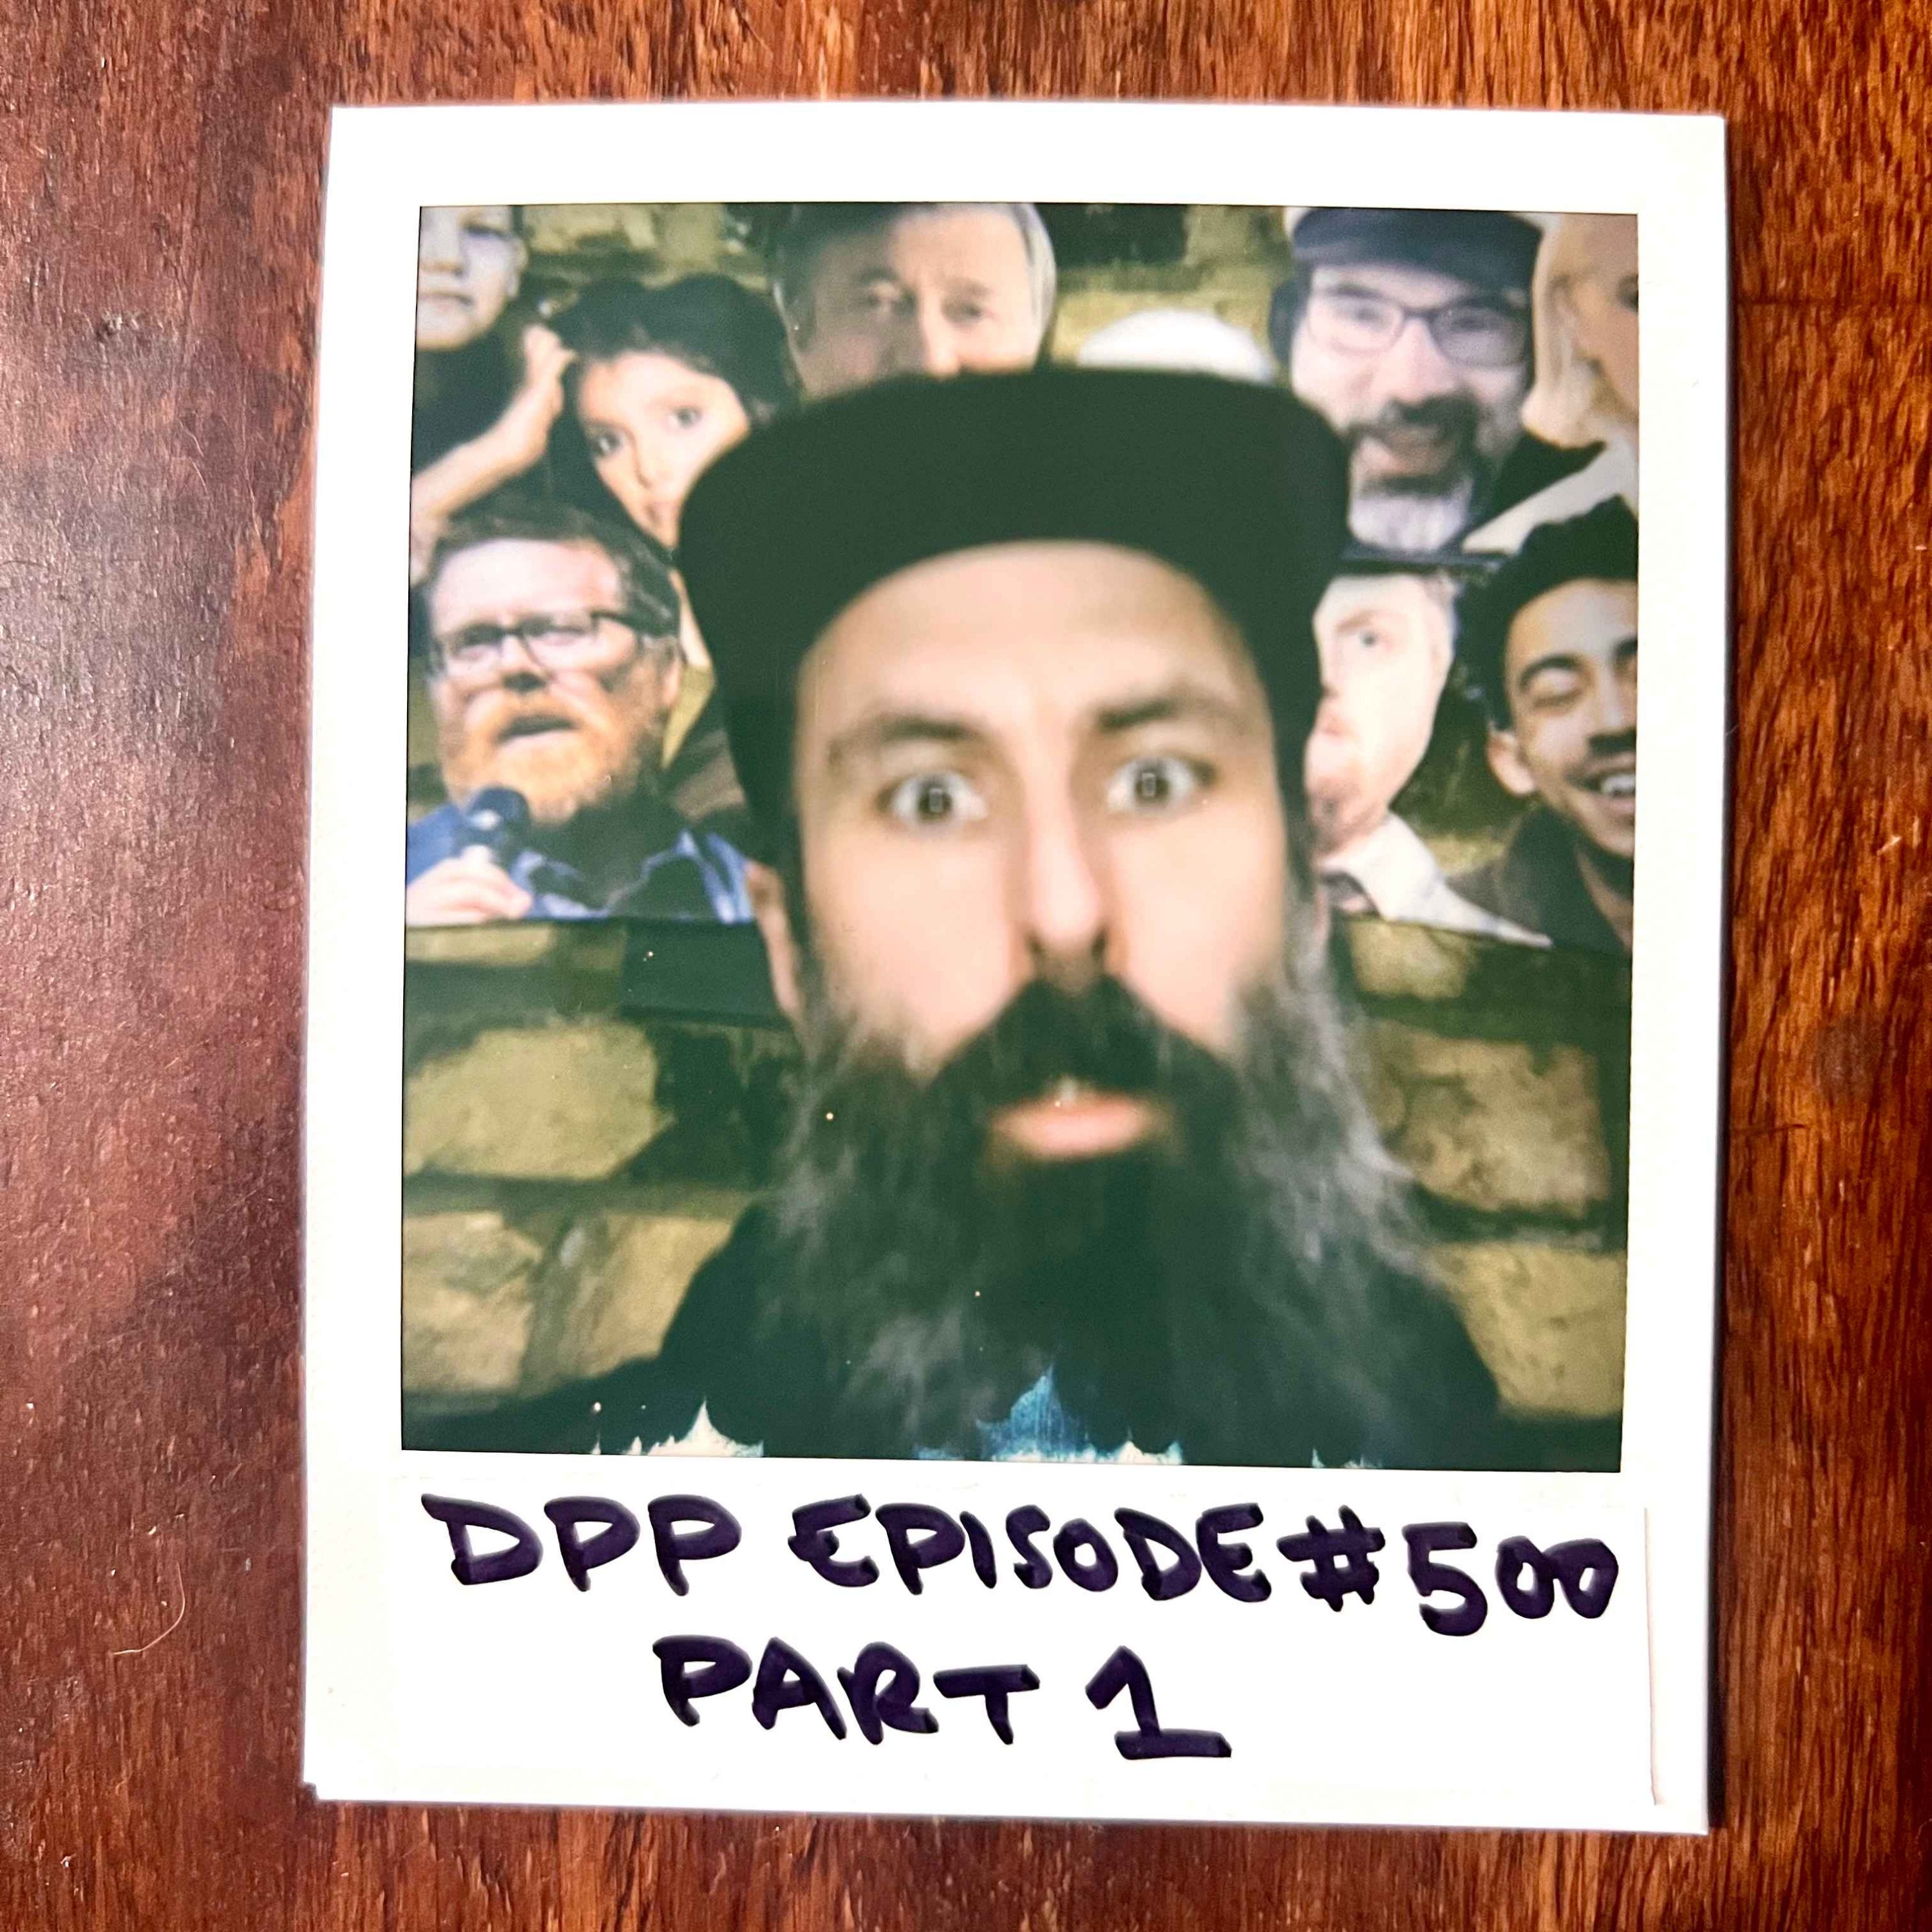 DPP Episode 500! (Part 1 of 2) • Distraction Pieces Podcast with Scroobius Pip #500